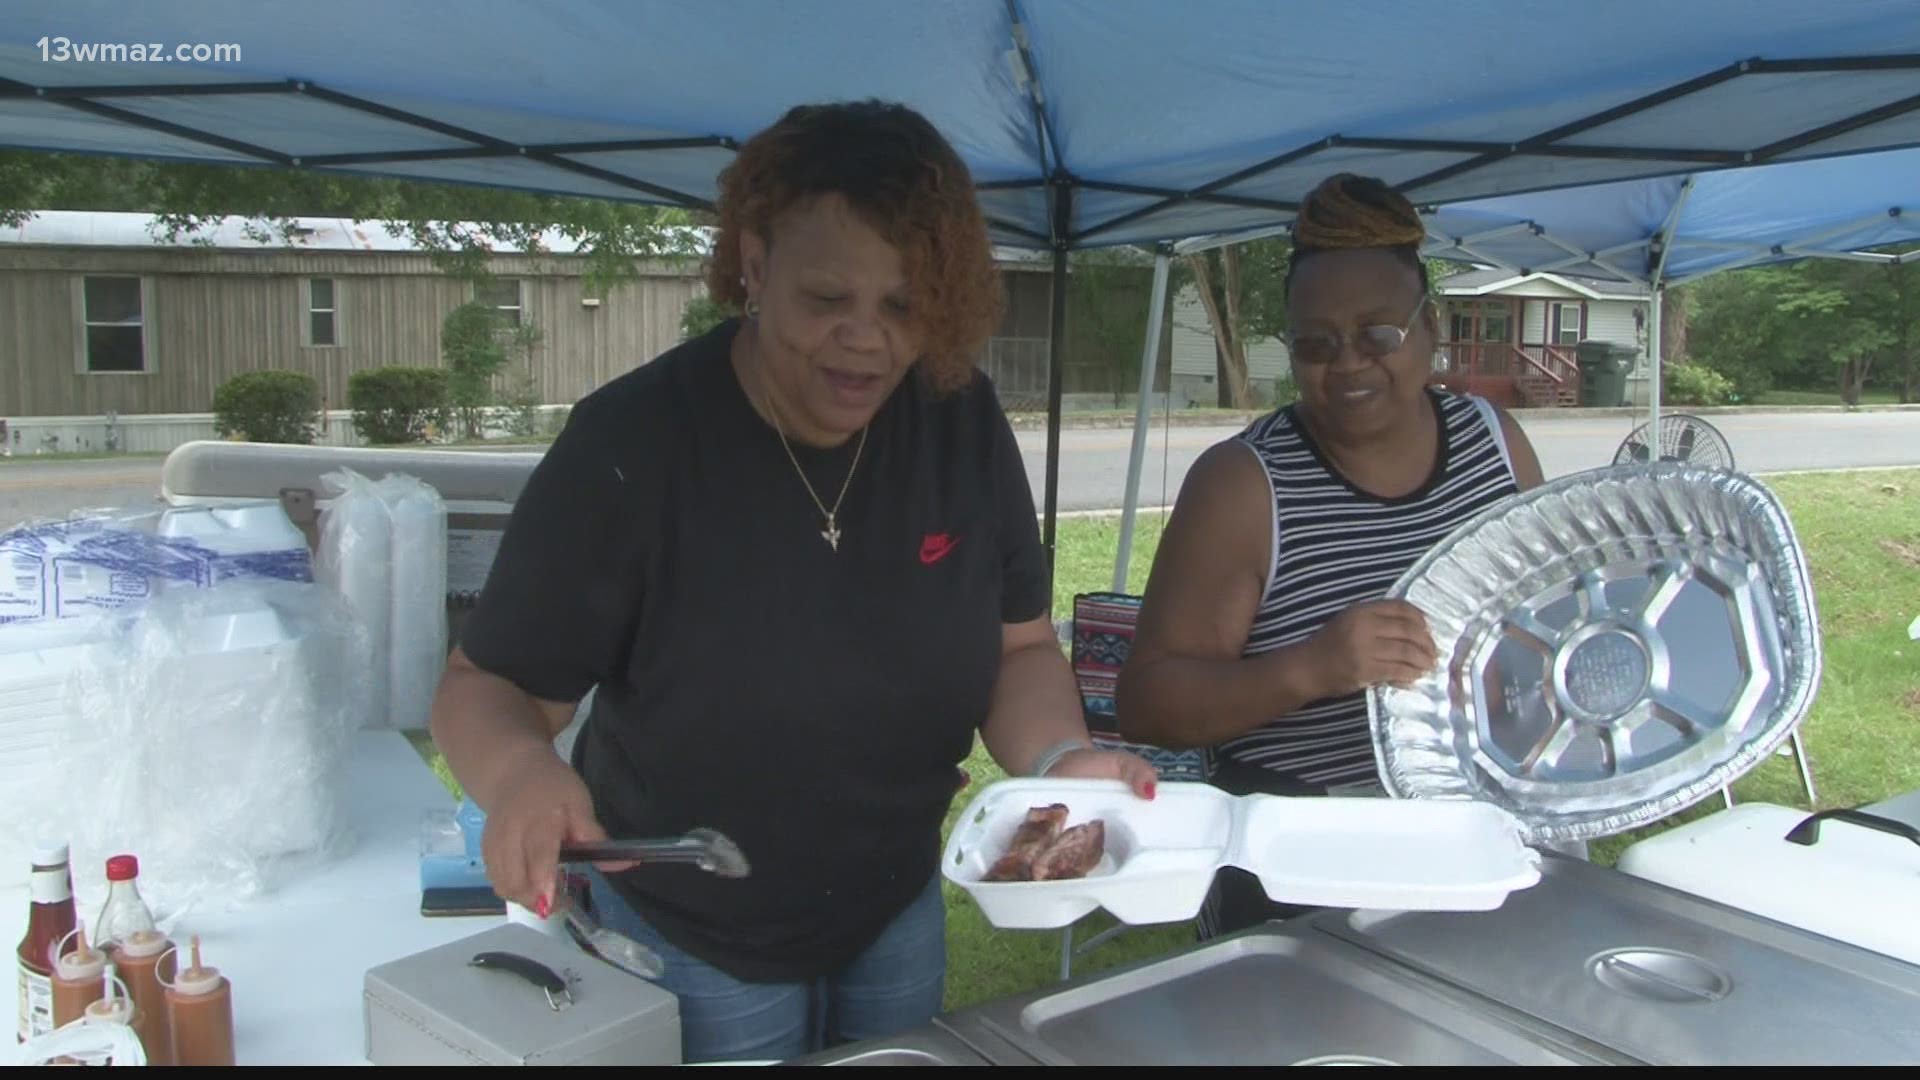 The city looks to turn the Juneteenth holiday celebration into a new tradition.